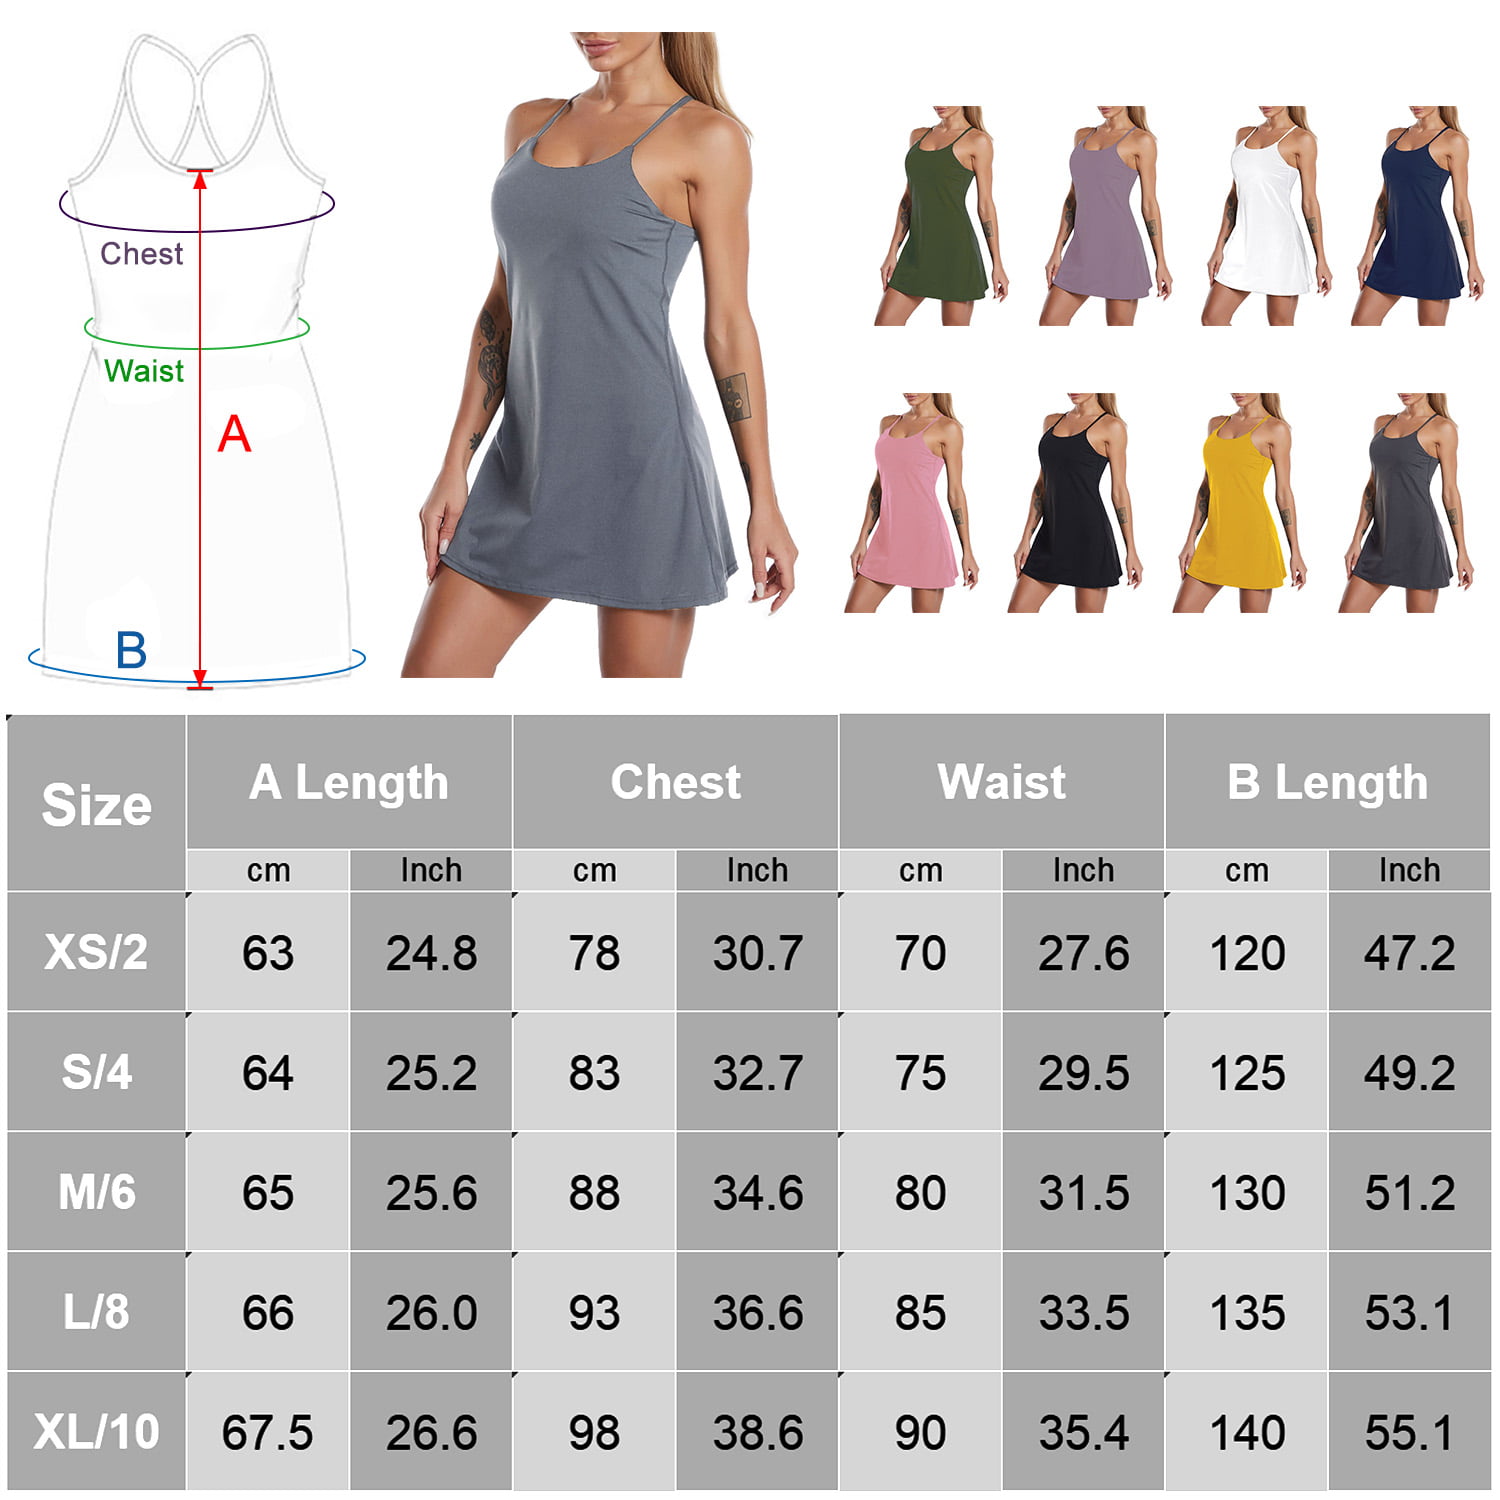 IUGA Womens Tennis Dress Built in Shorts & Bra Adjustable Straps Exercise  Workout Dress with Pockets Golf Athletic Dresses